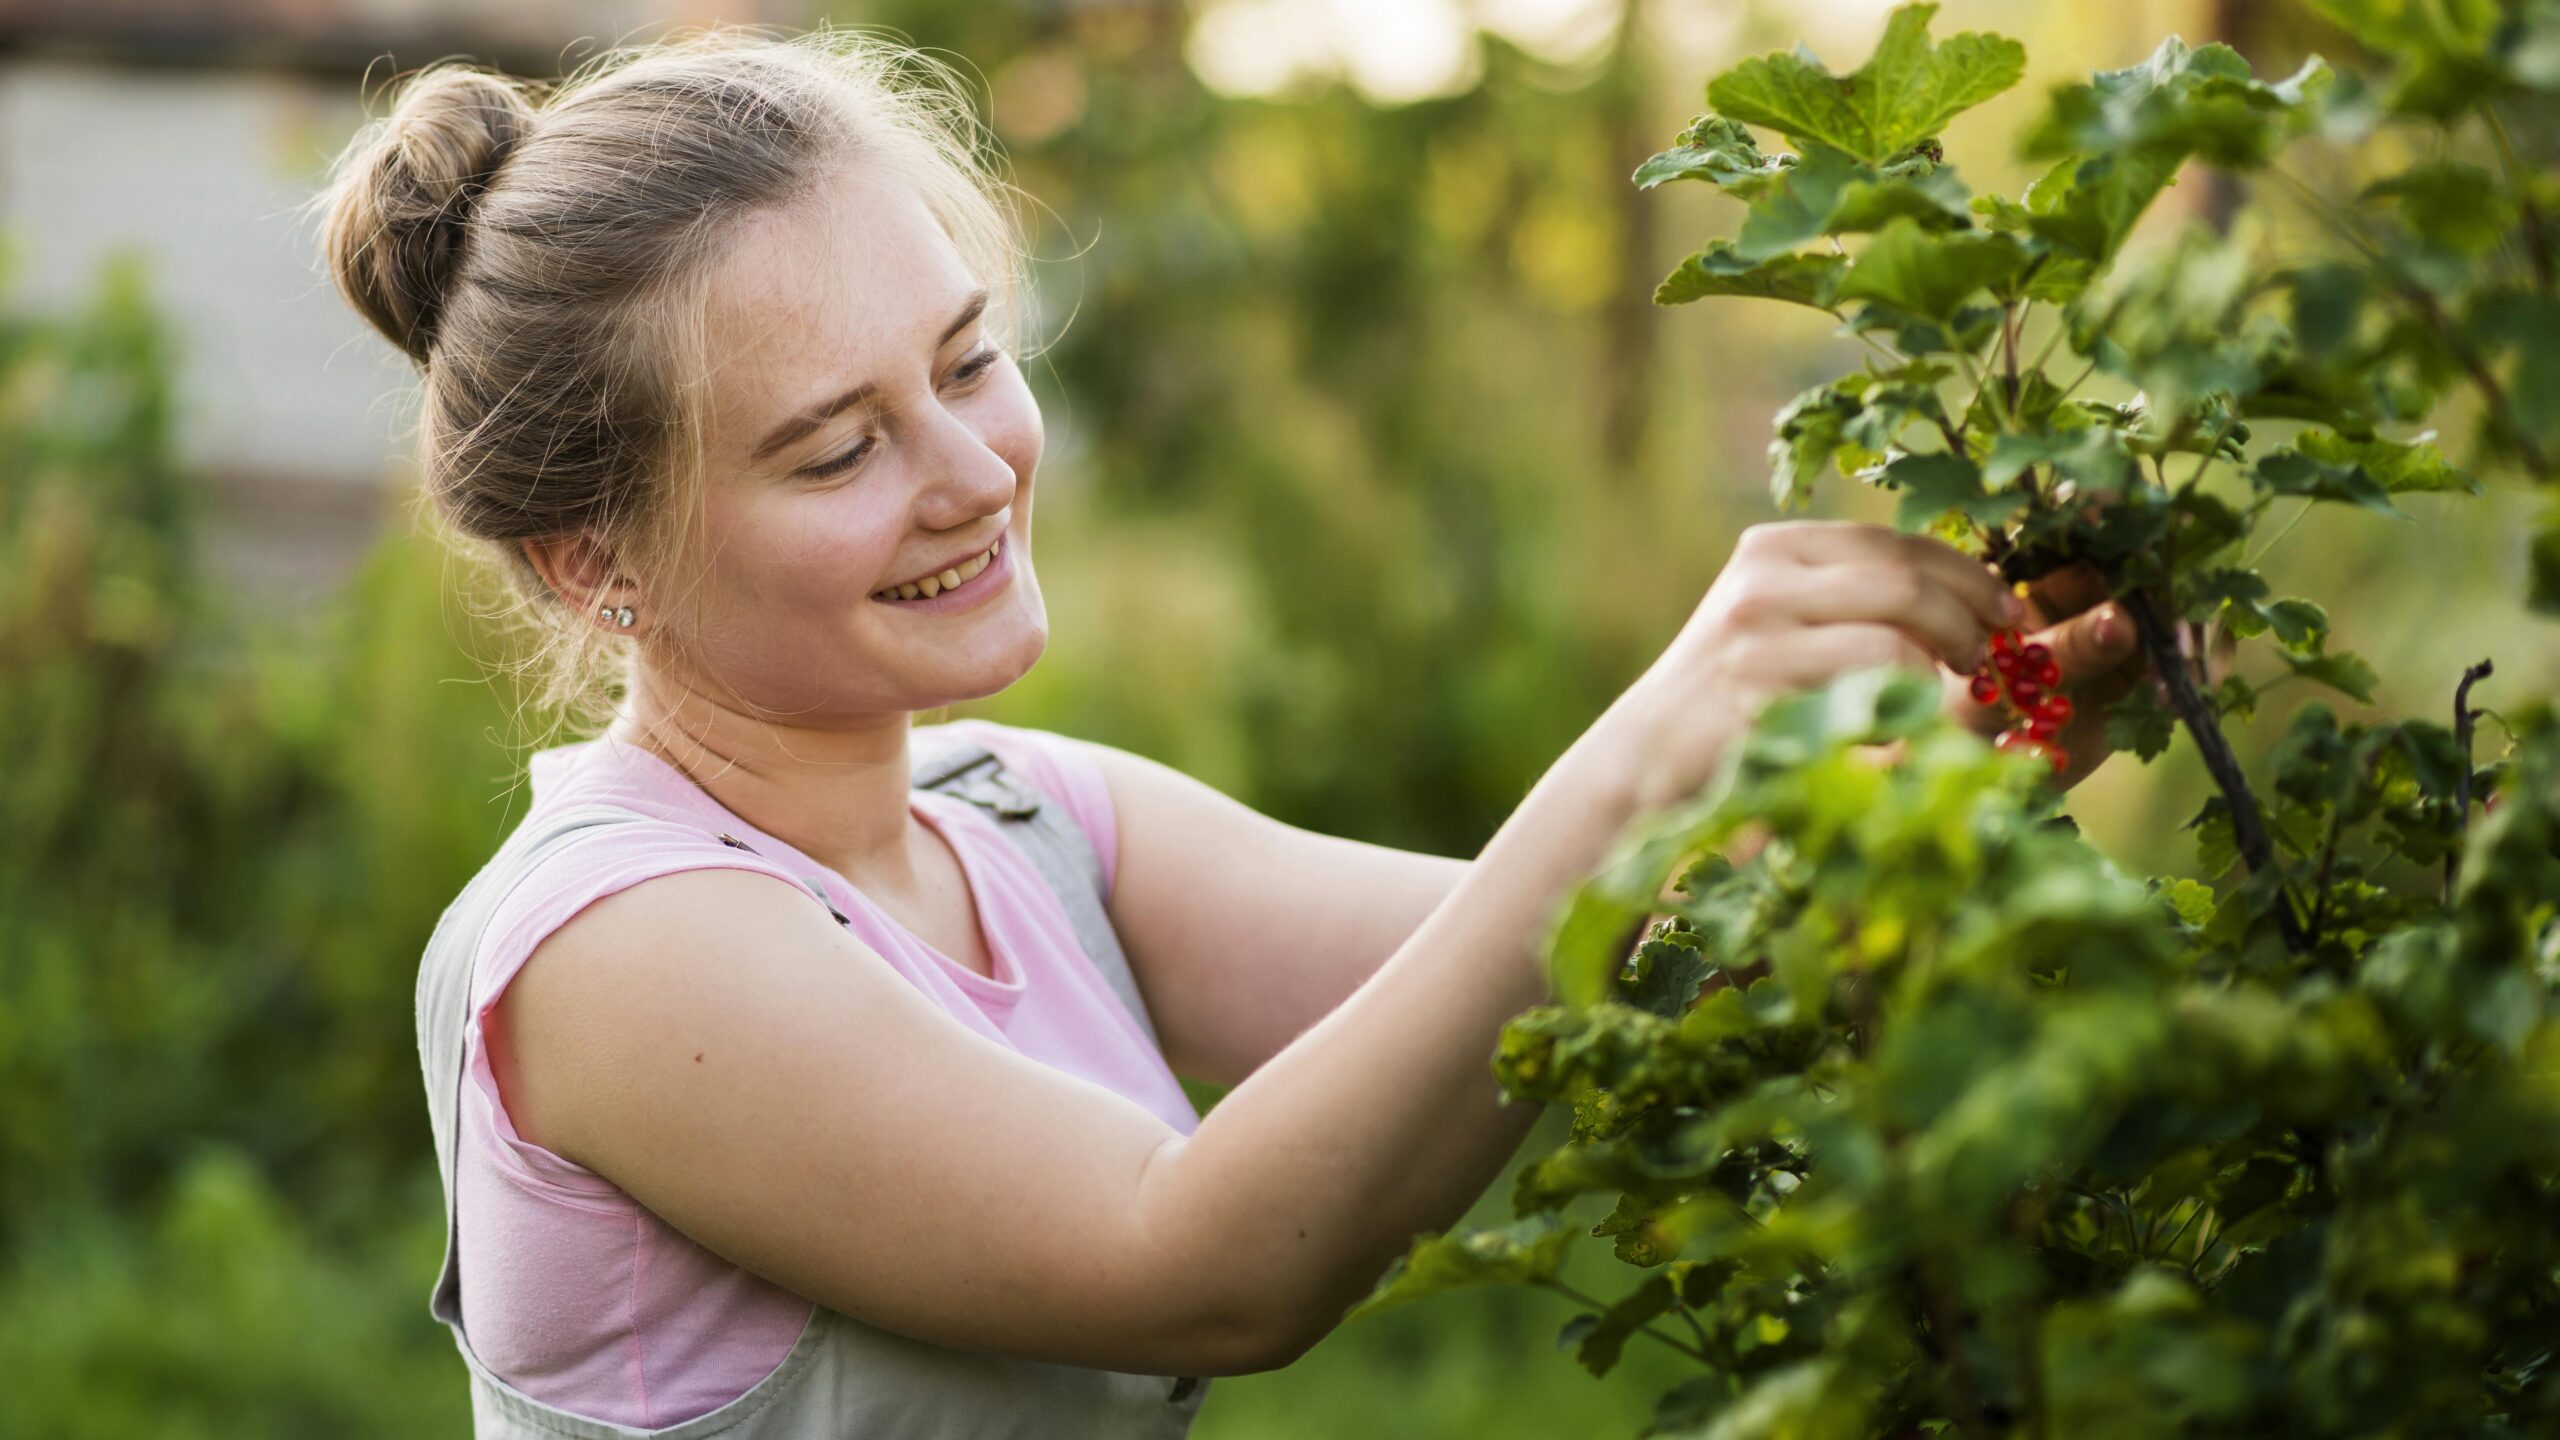 smiley-girl-picking-red-berries